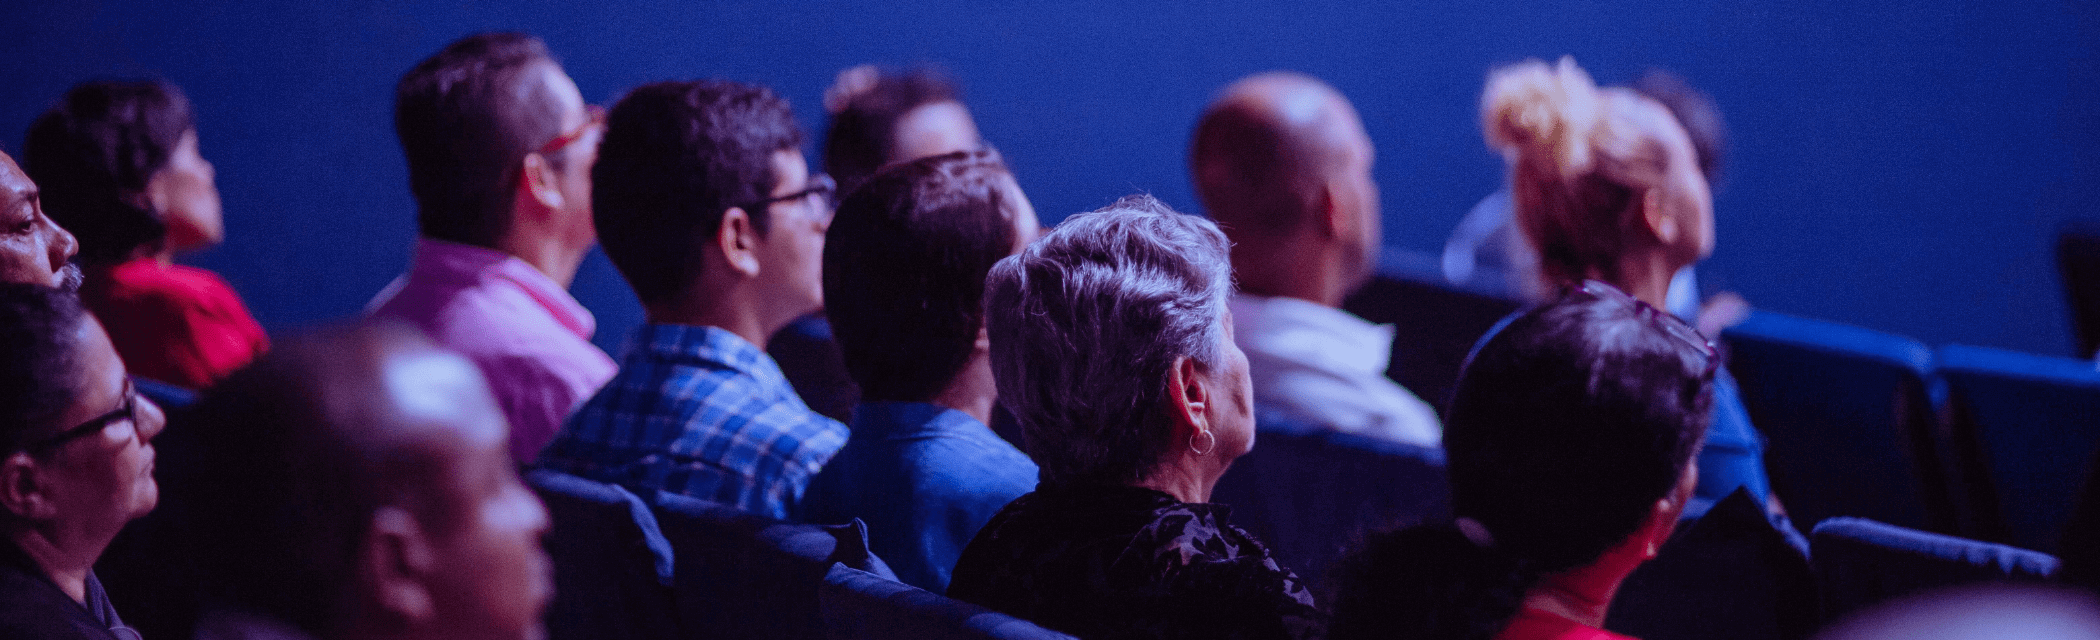 50 product management conferences to check out in 2021